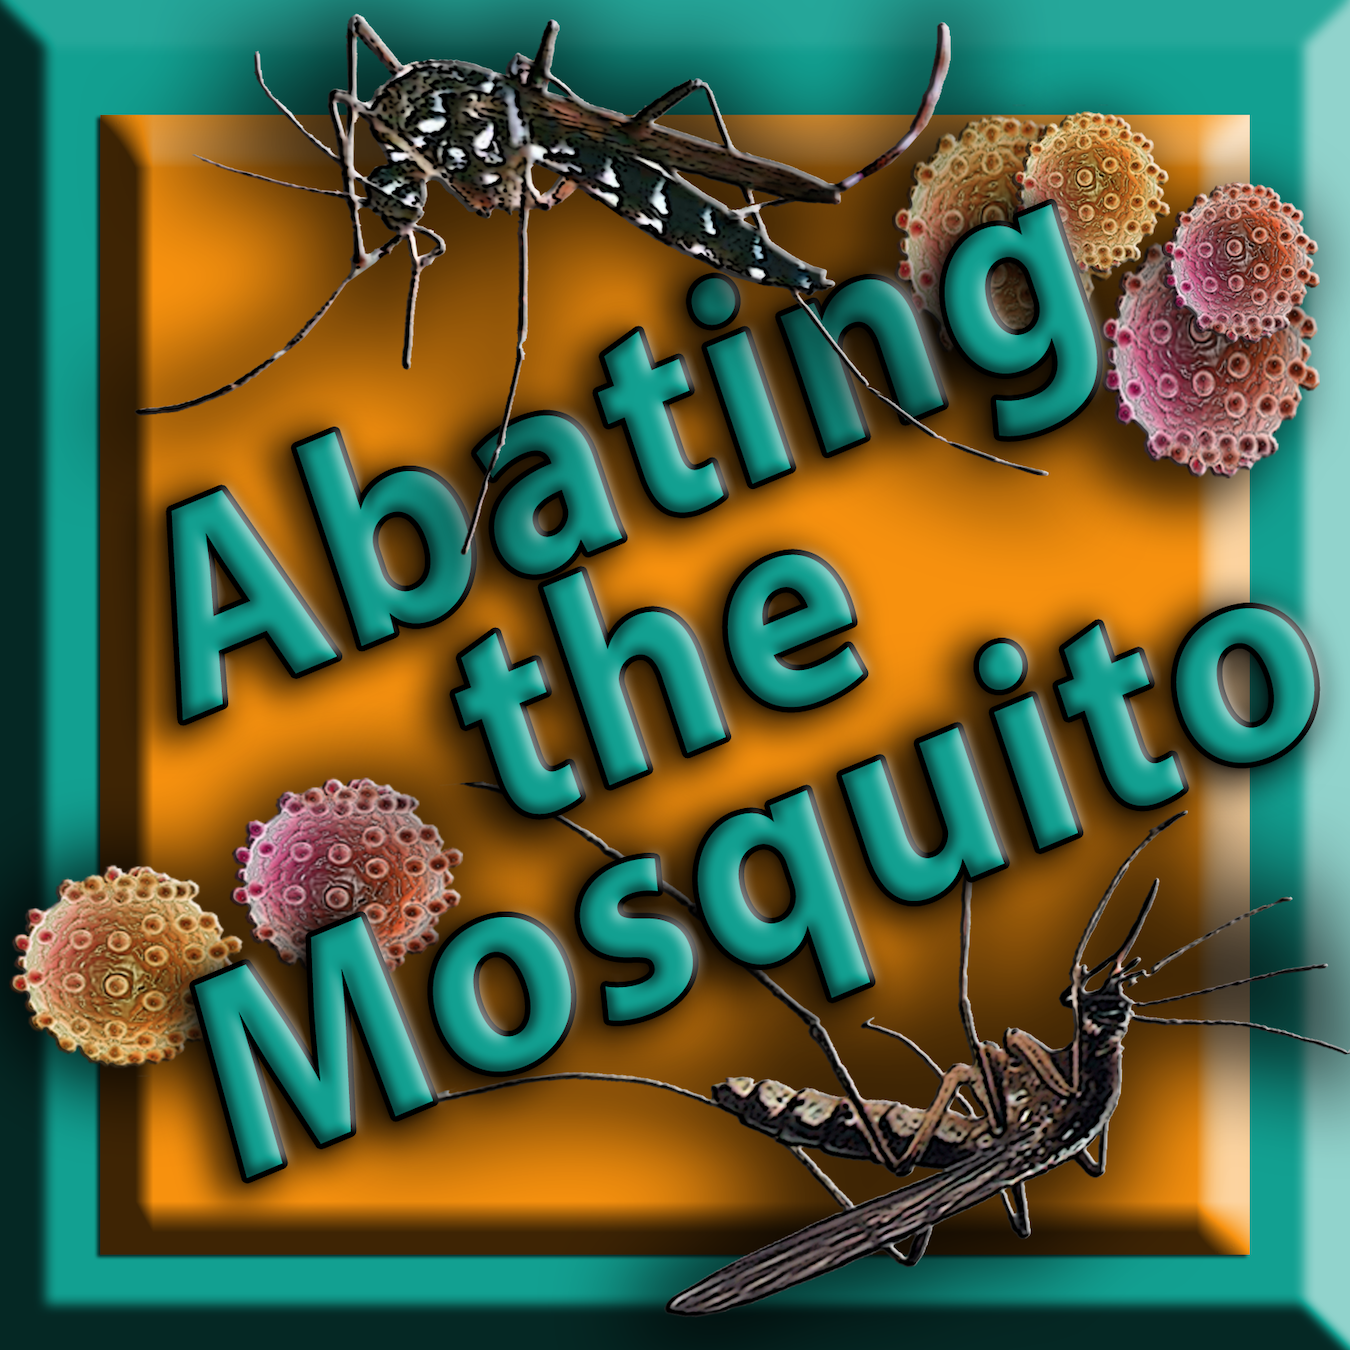 Michael Olson Food Chain Radio – Mosquito Abatement – Can we fight off the blood-sucking mosquito?